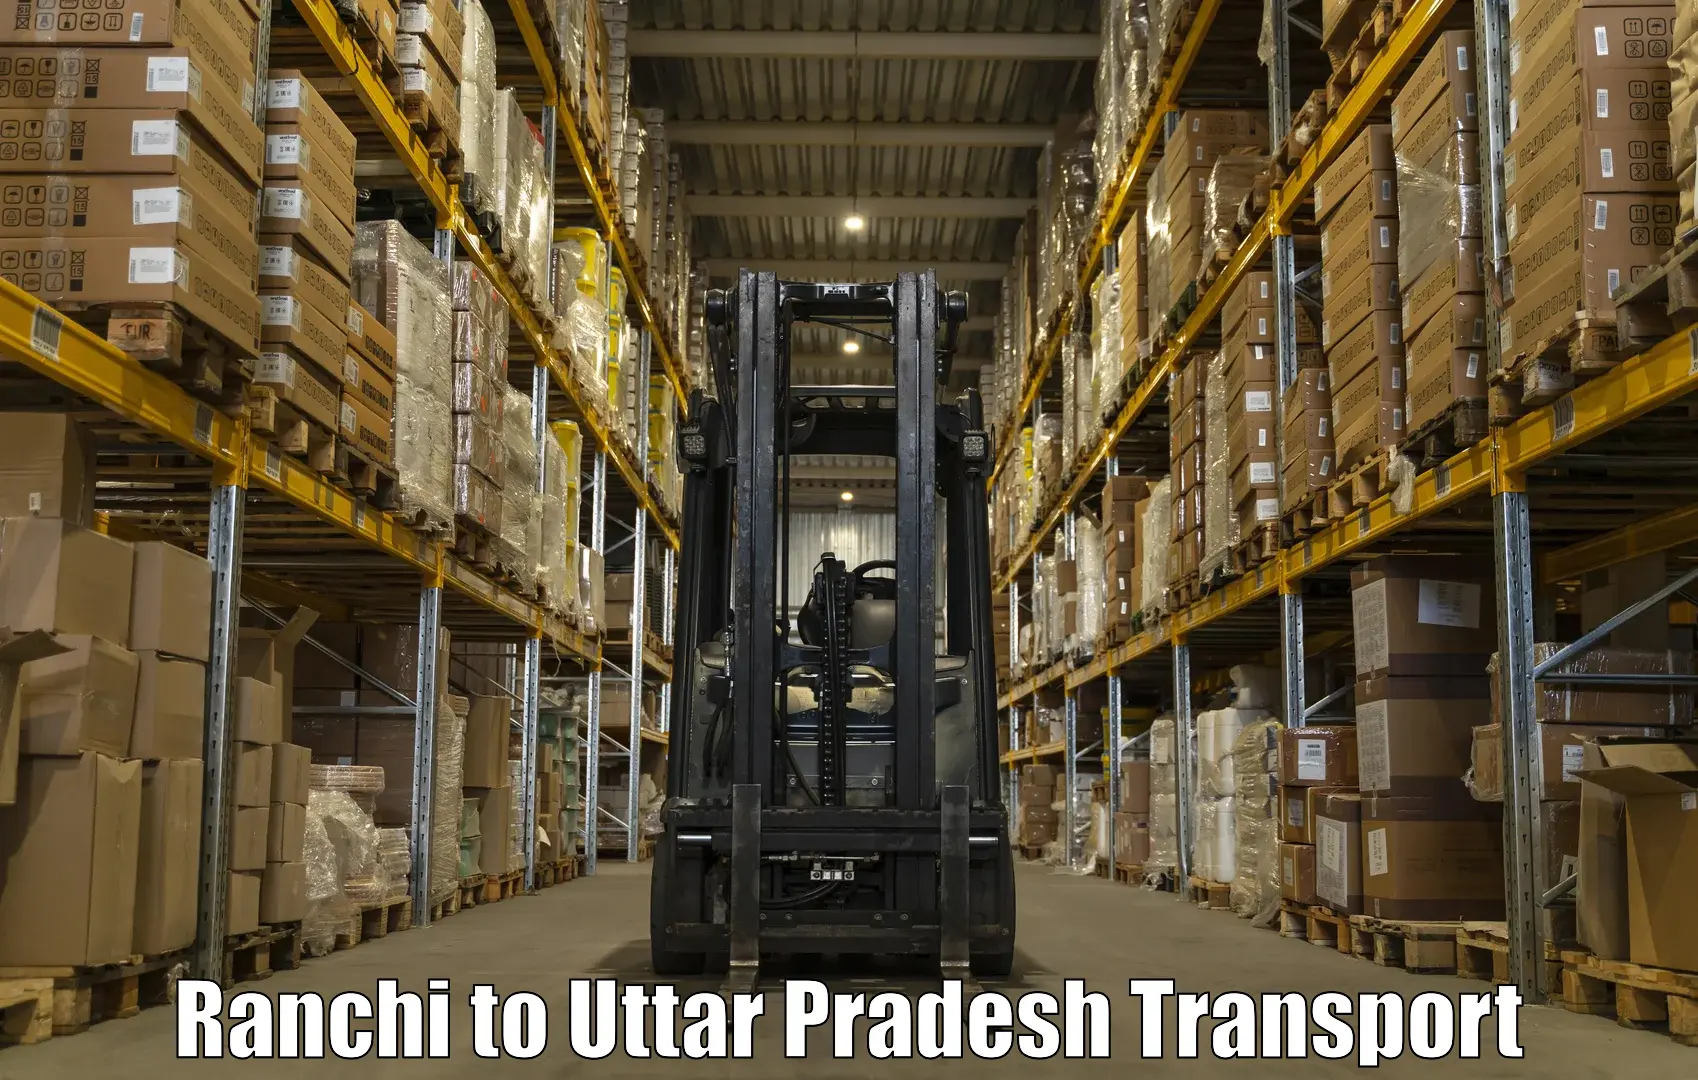 Air freight transport services Ranchi to Fatehabad Agra